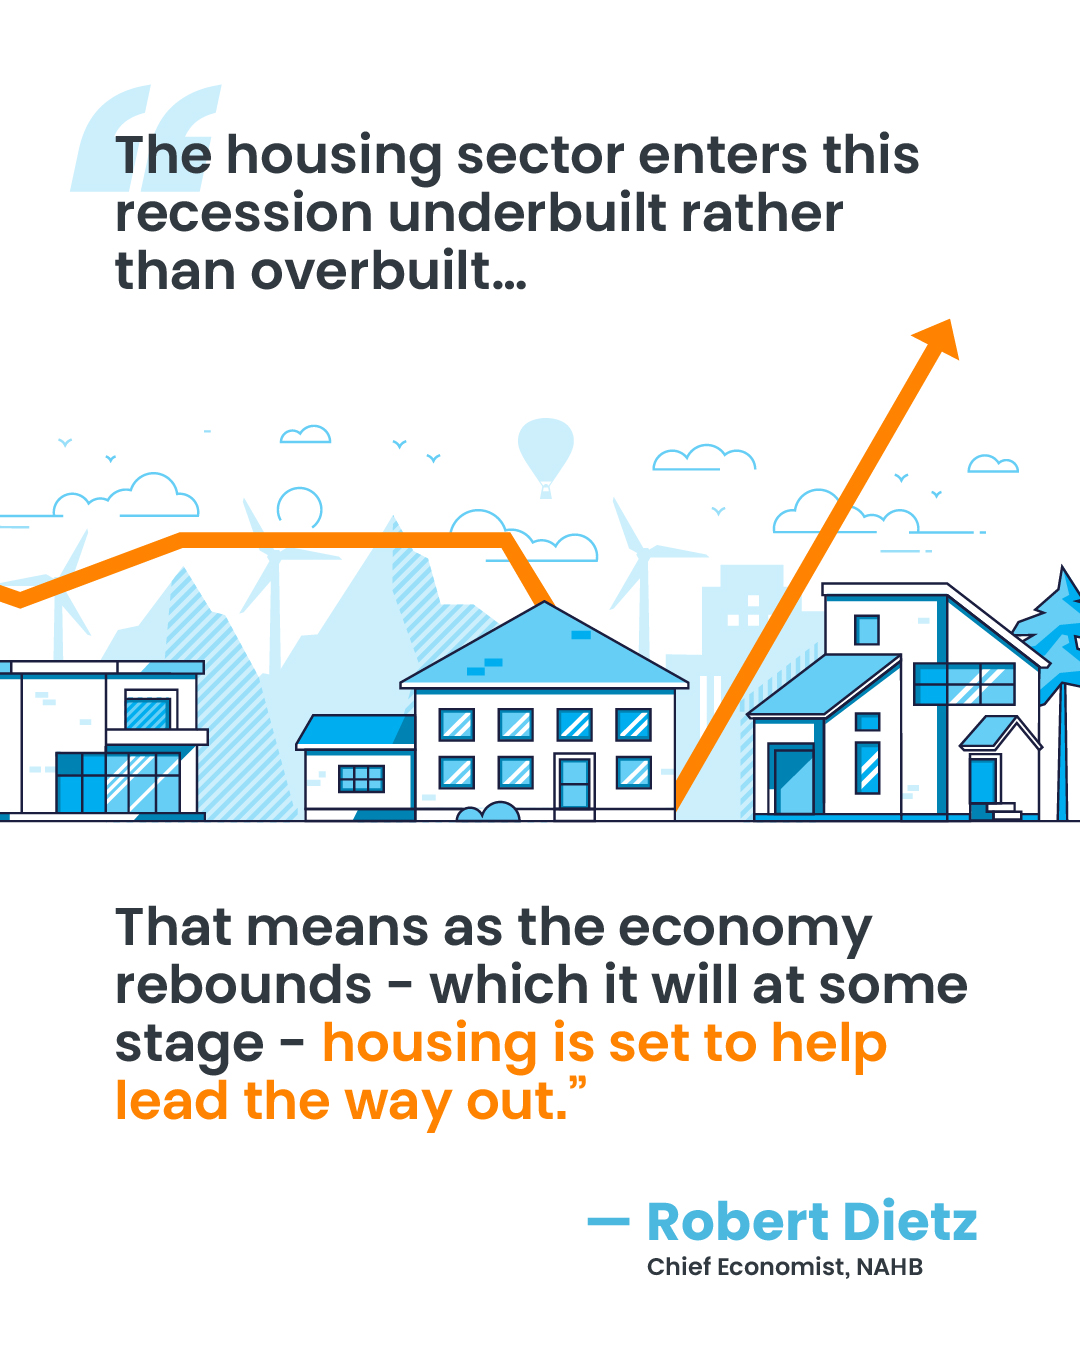 The Housing Market Is Positioned to Help the Economy Recover | Simplifying The Market